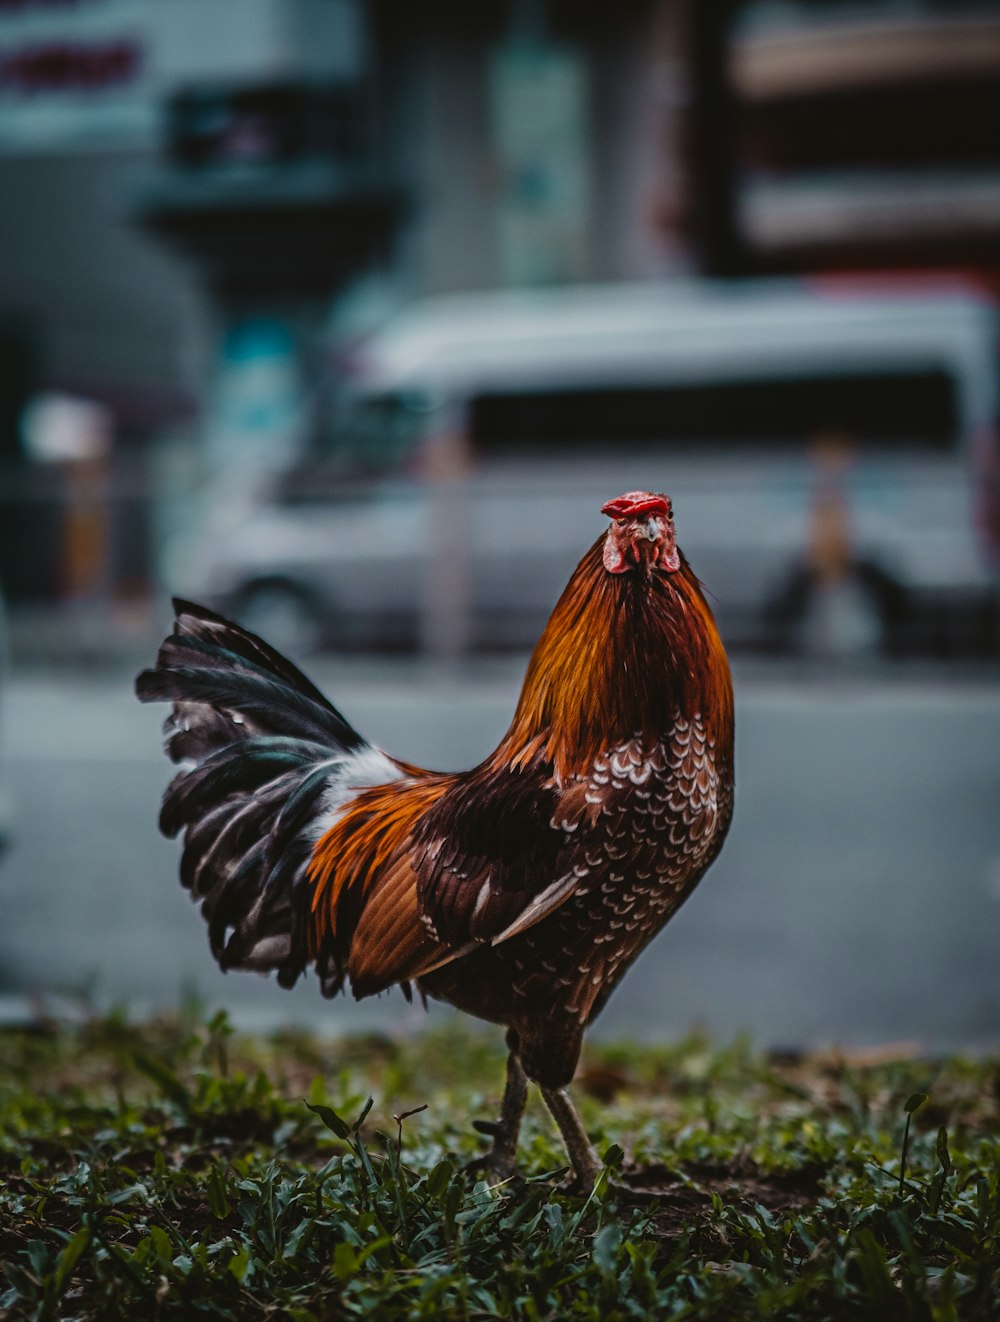 a rooster standing in the grass near a street